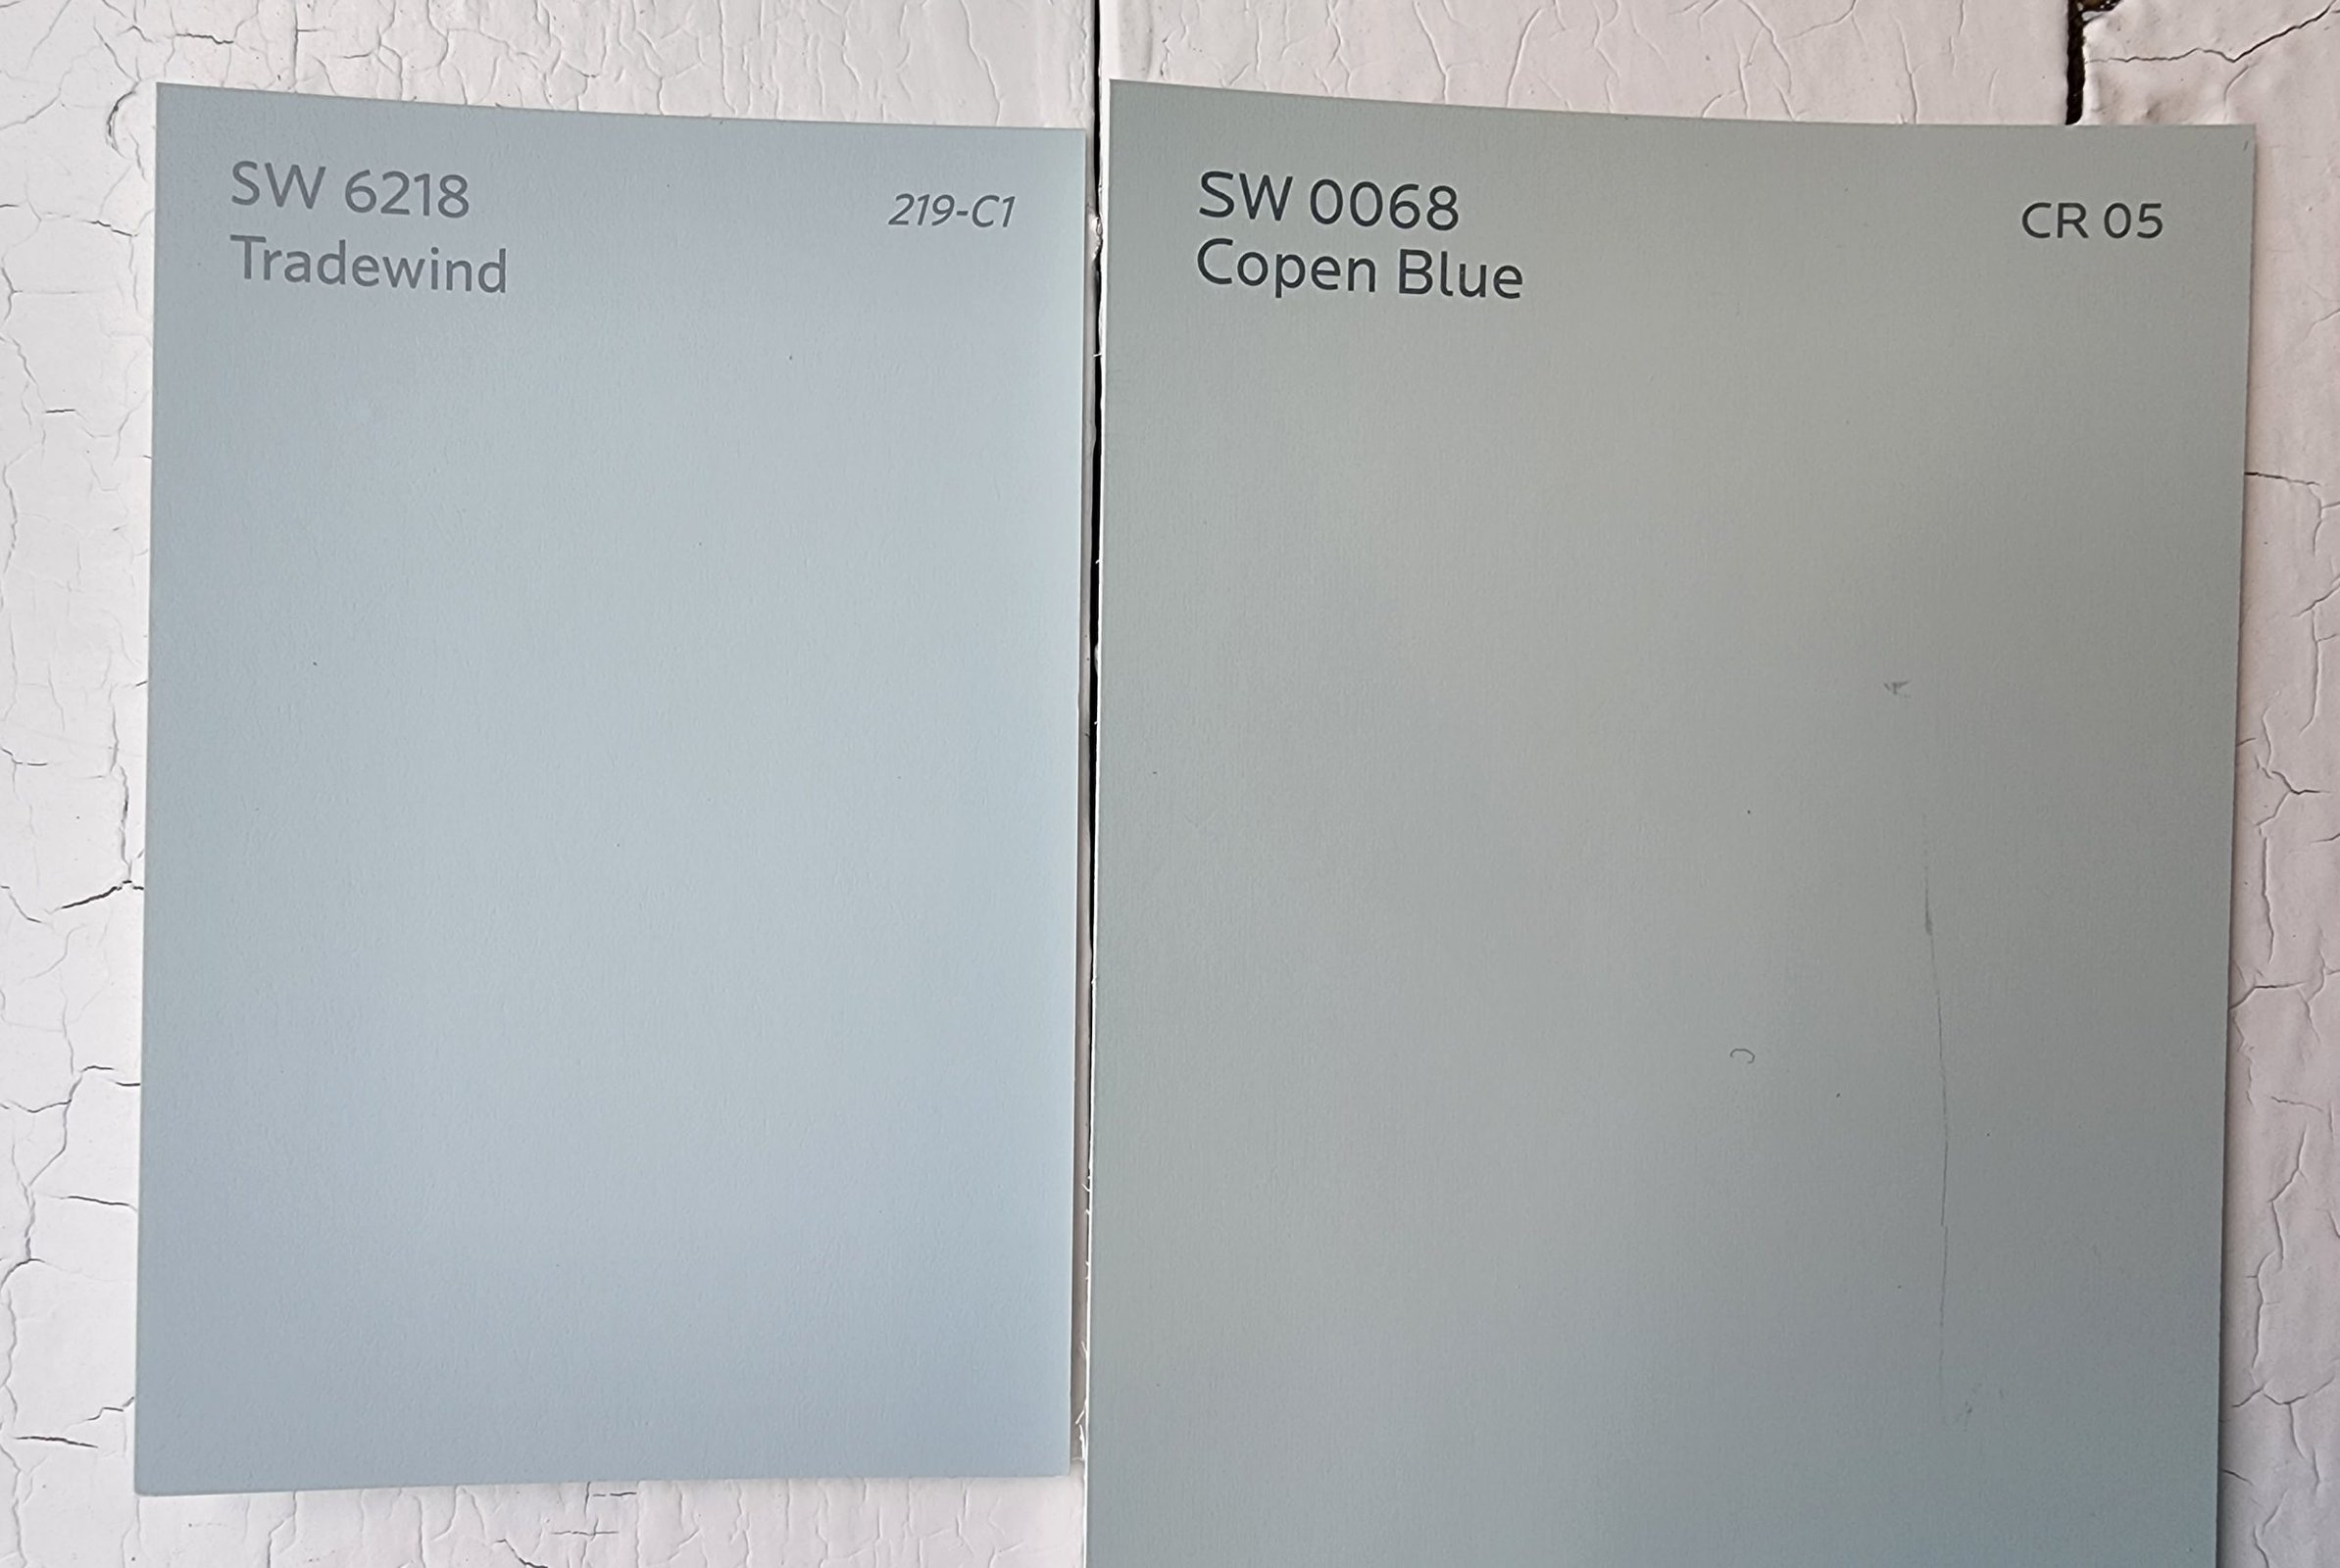  Tradewind vs Copen Blue by Sherwin Williams scaled